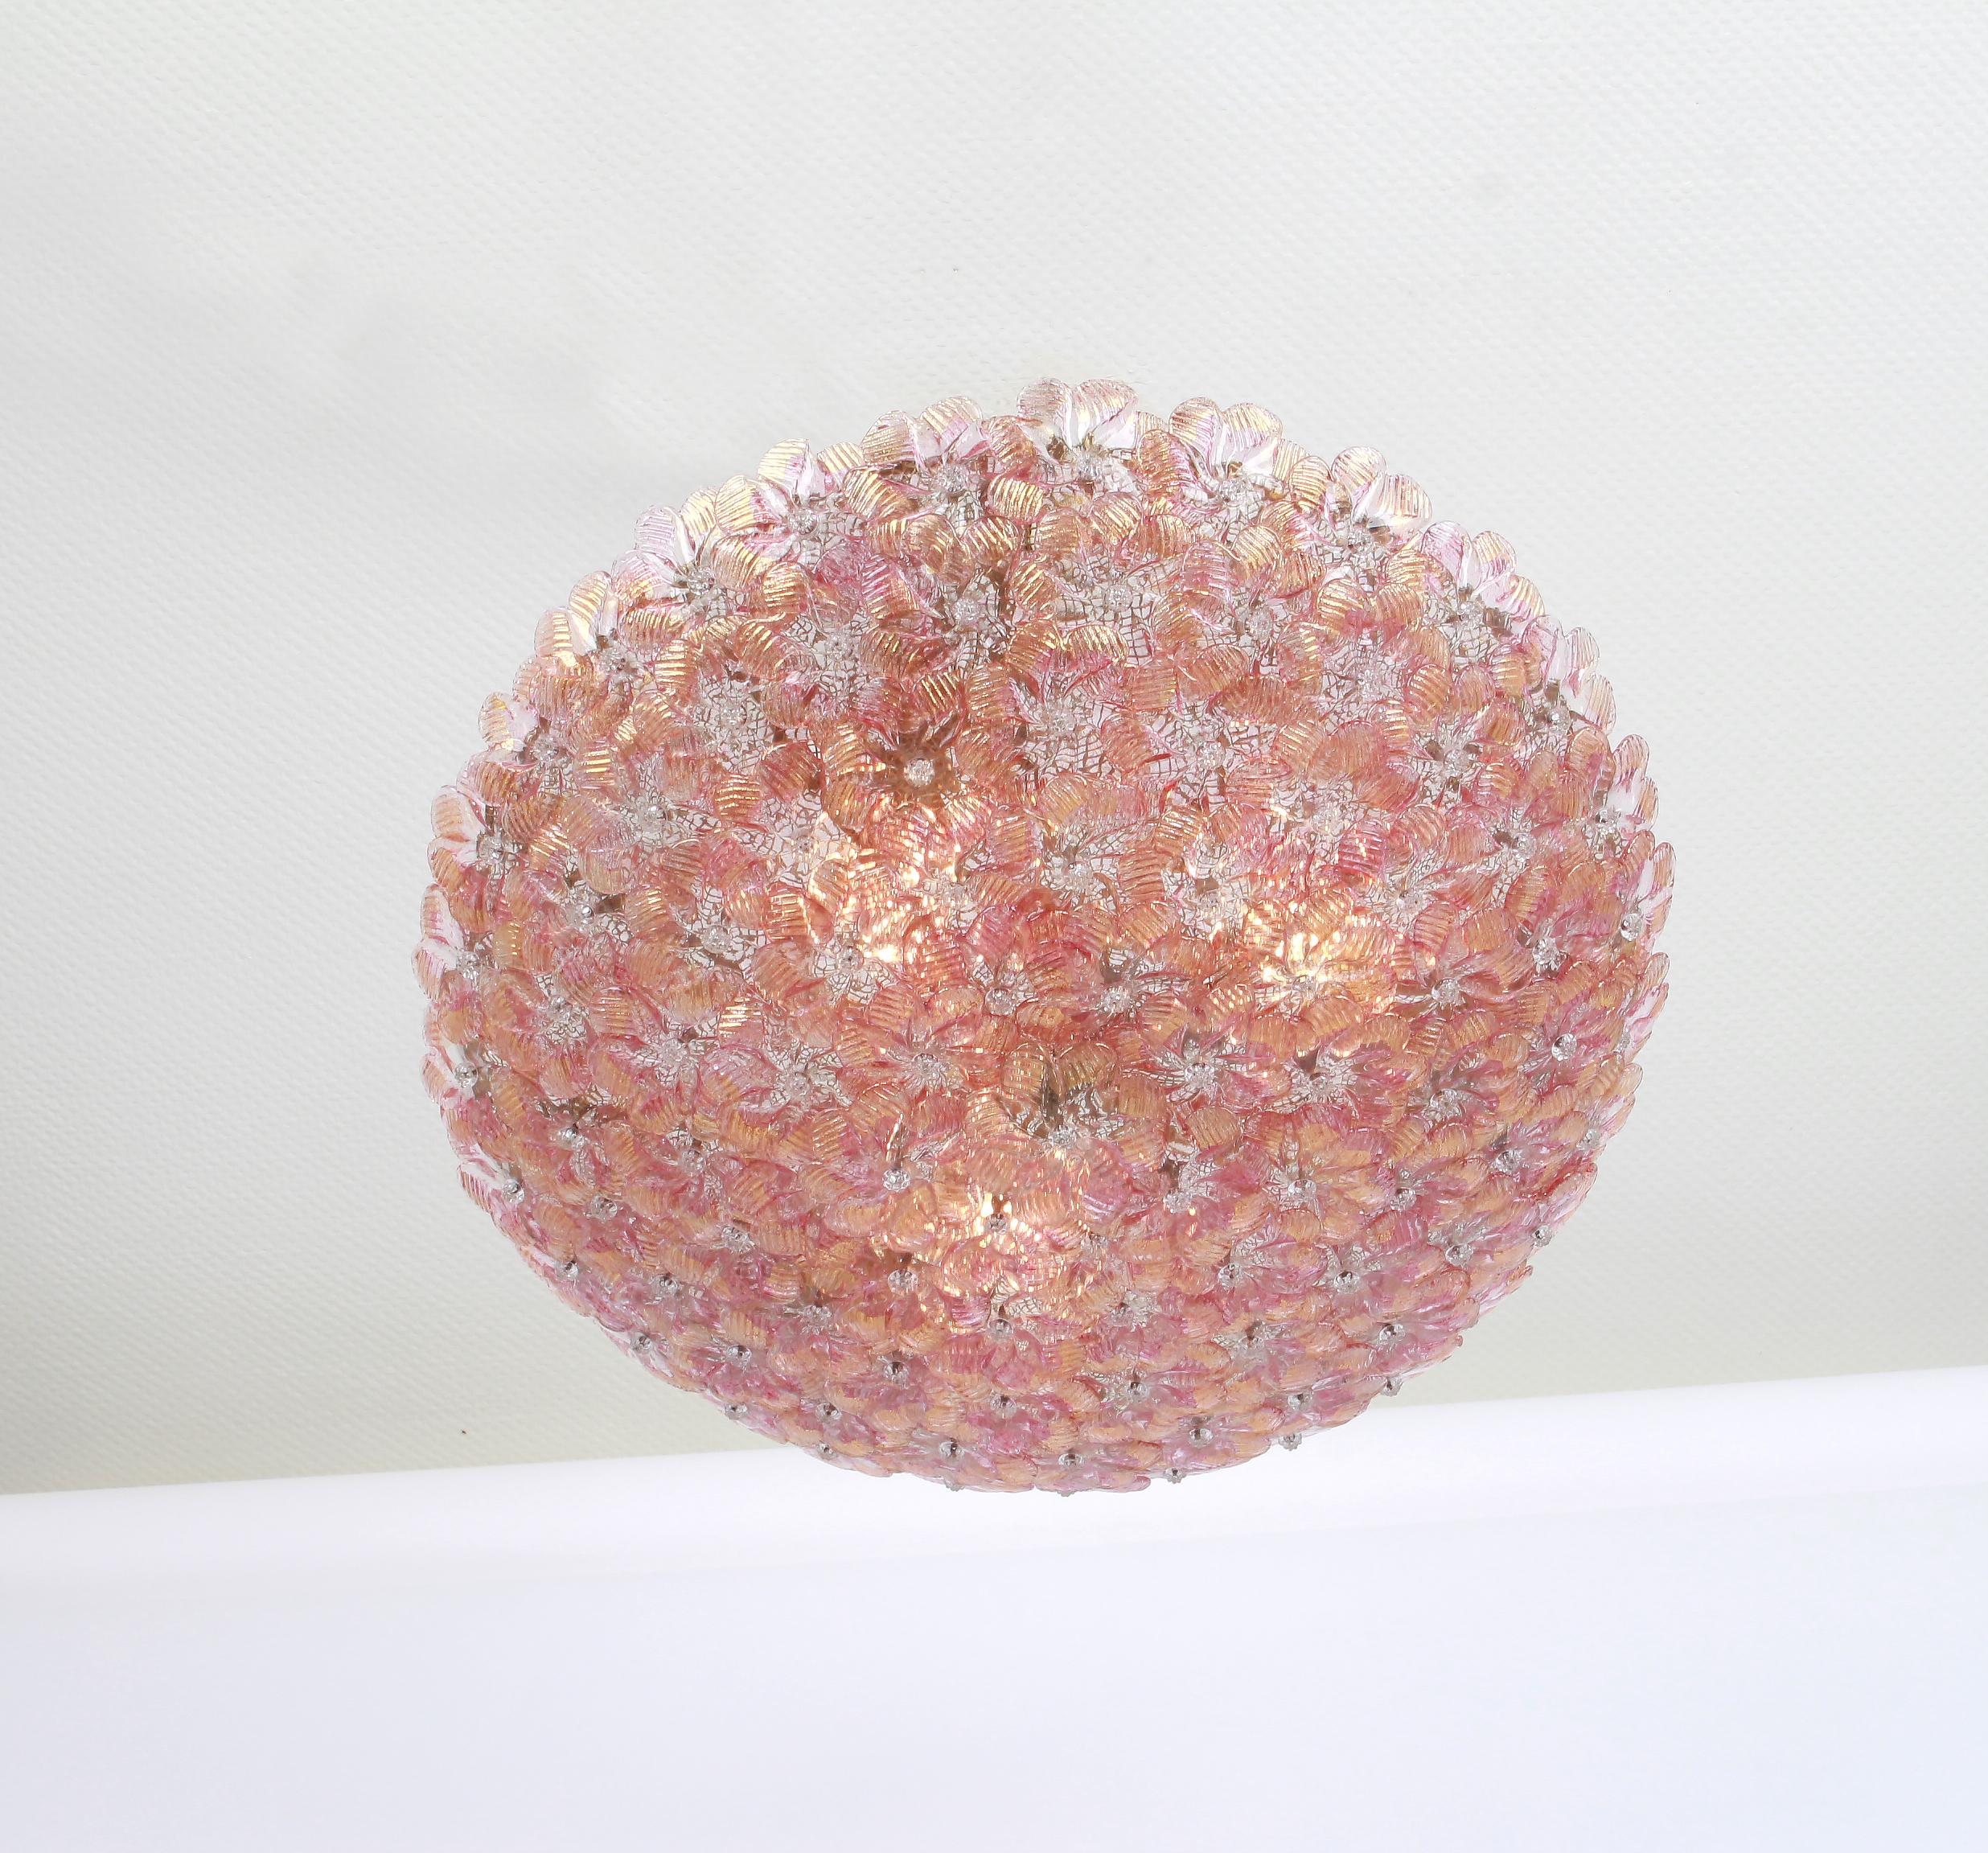 1 of 2 Midcentury Murano Glass Ceiling Fixture by Barovier & Toso, Italy, 1960s For Sale 5